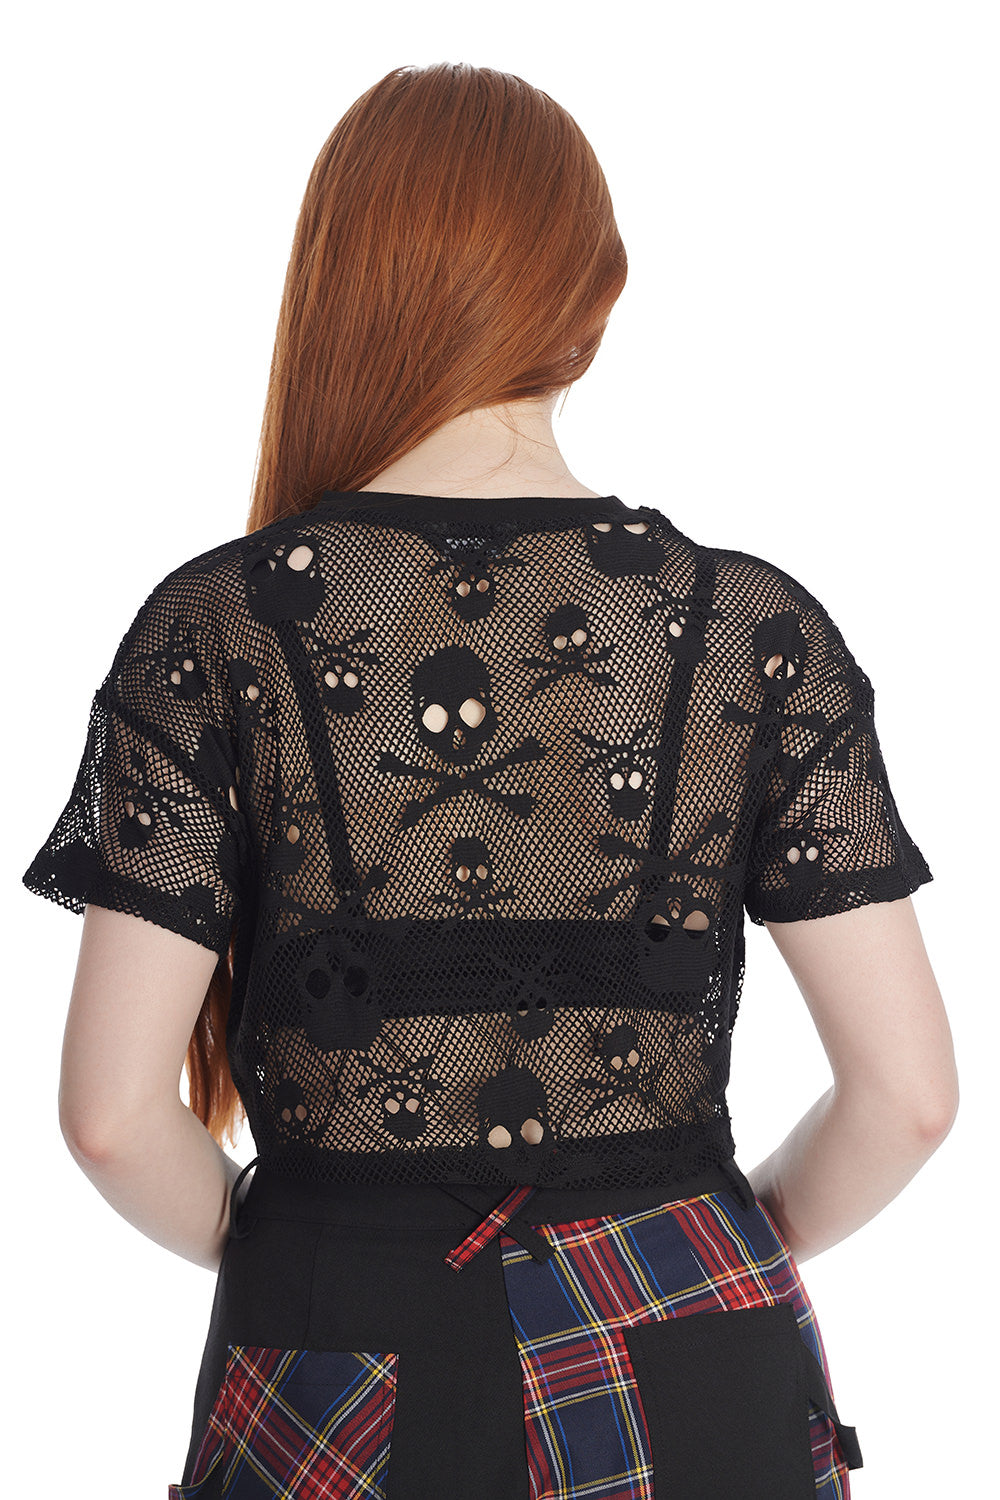 Banned Alternative SKULL QUEEN CROPPED TOP